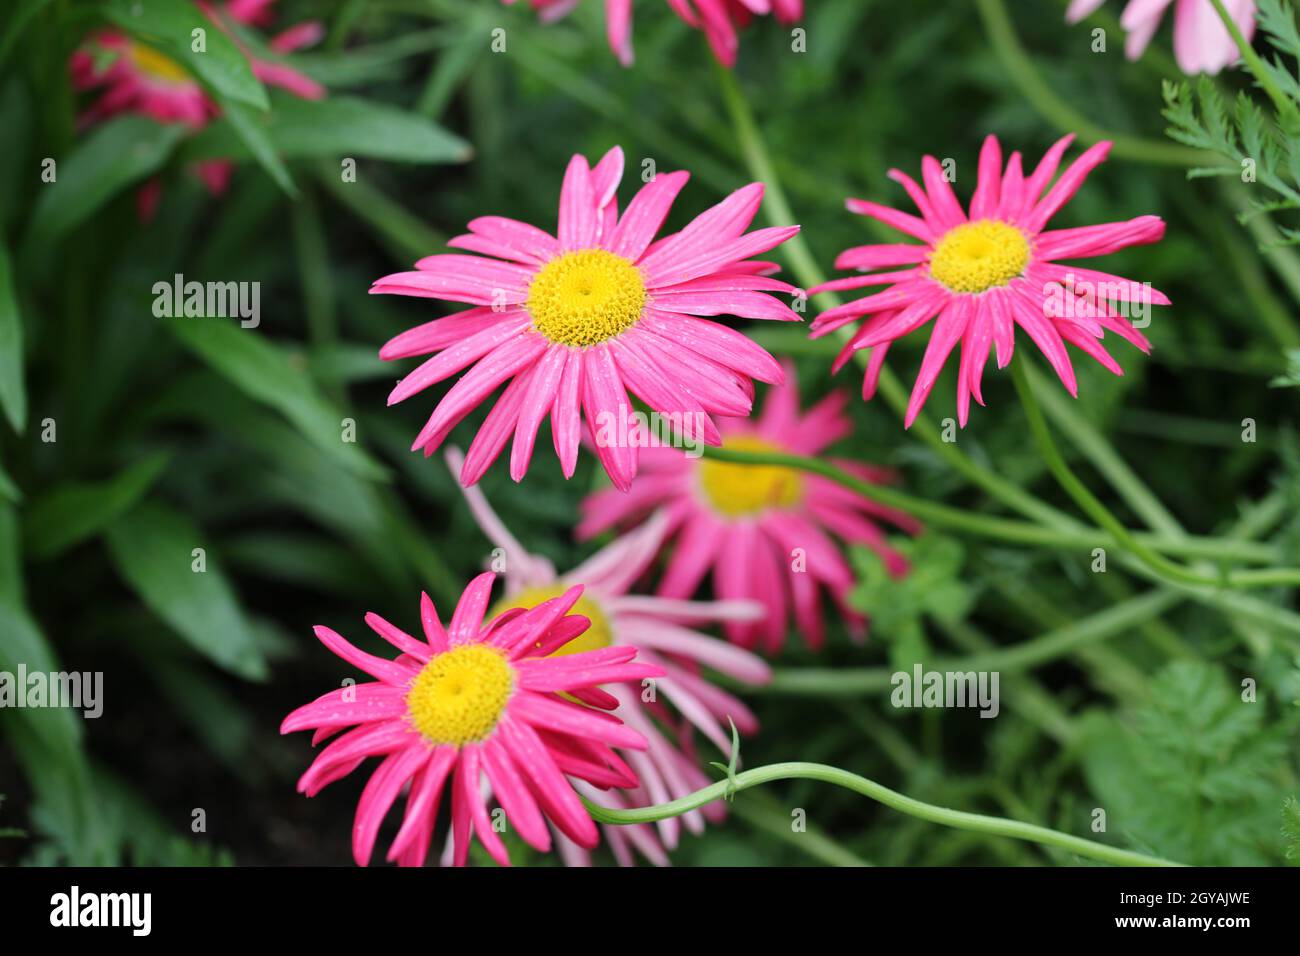 Pink painted daisy, Tanacetum coccineum variety Evenglow, flowers with a yellow centre and a background of blurred leaves and flowers. Stock Photo